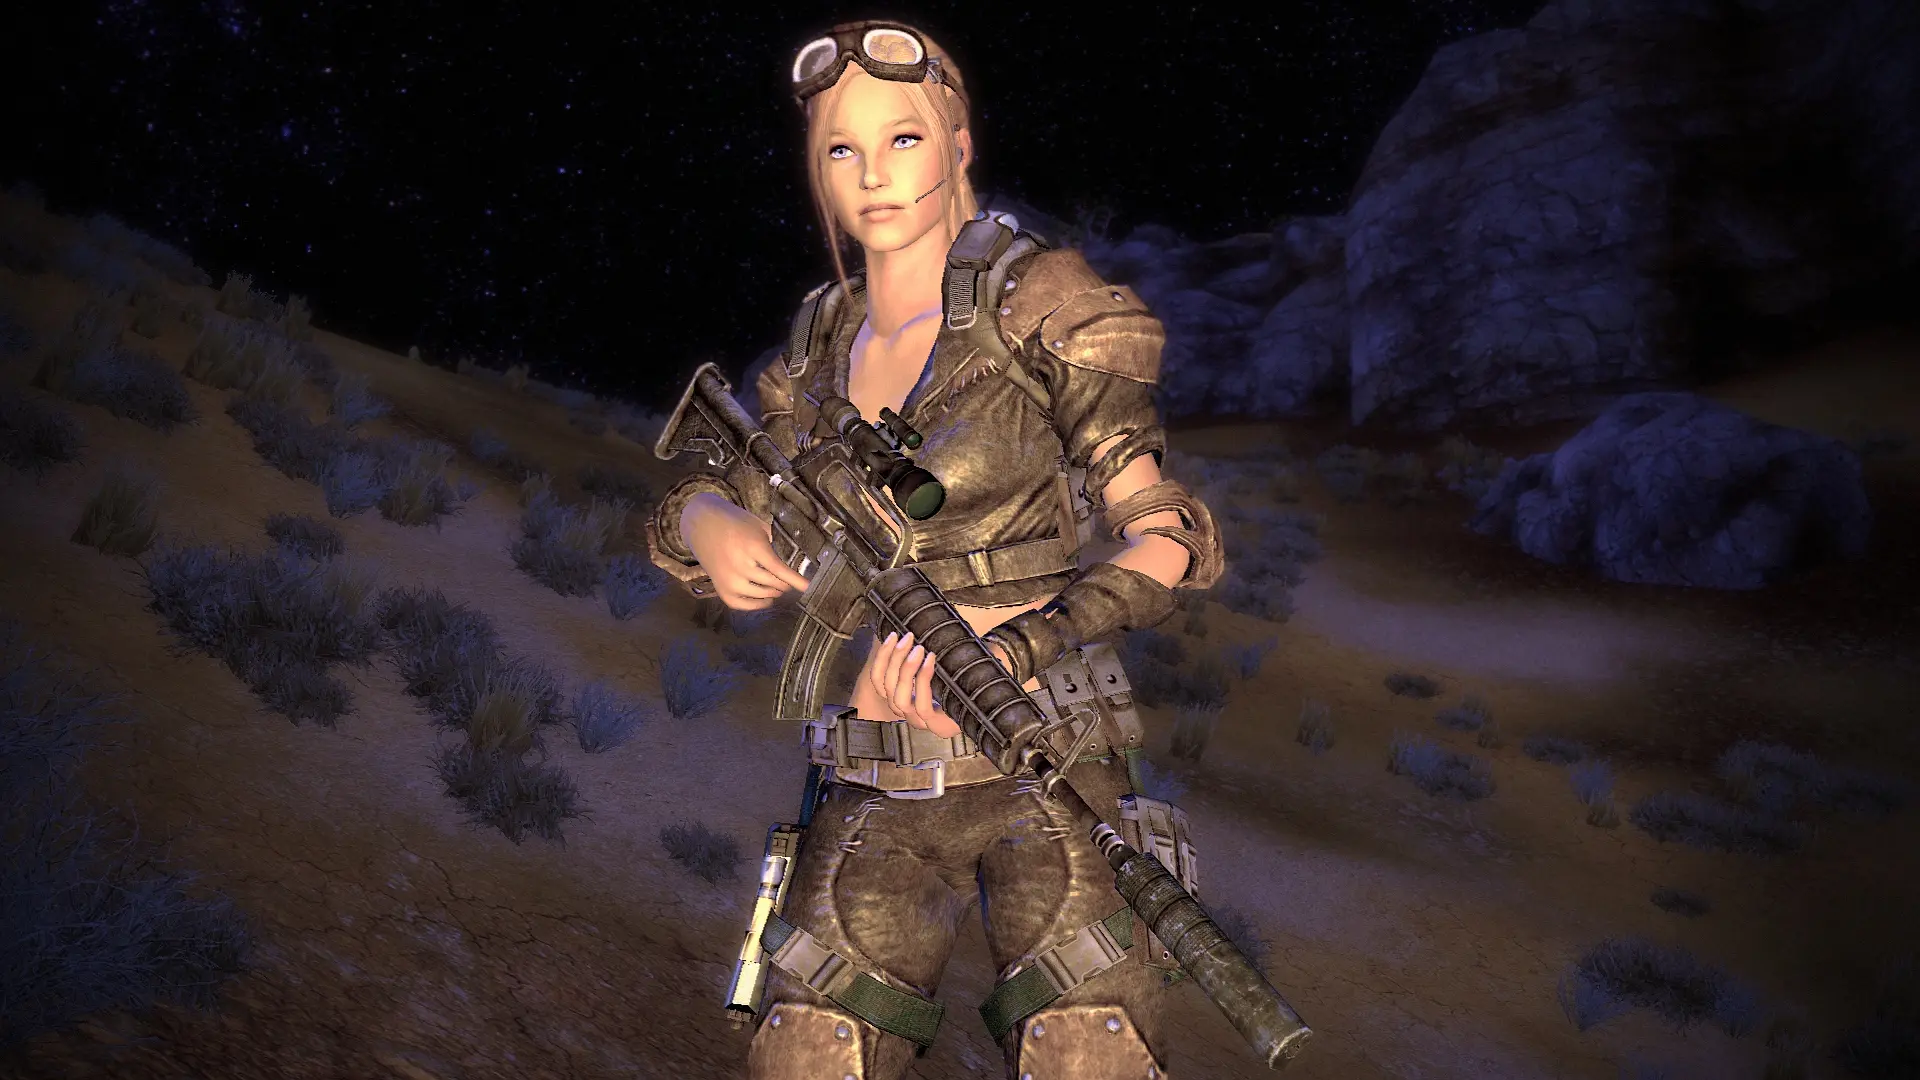 New Vegas Type3 Leather Armors At Fallout New Vegas Mods And Community